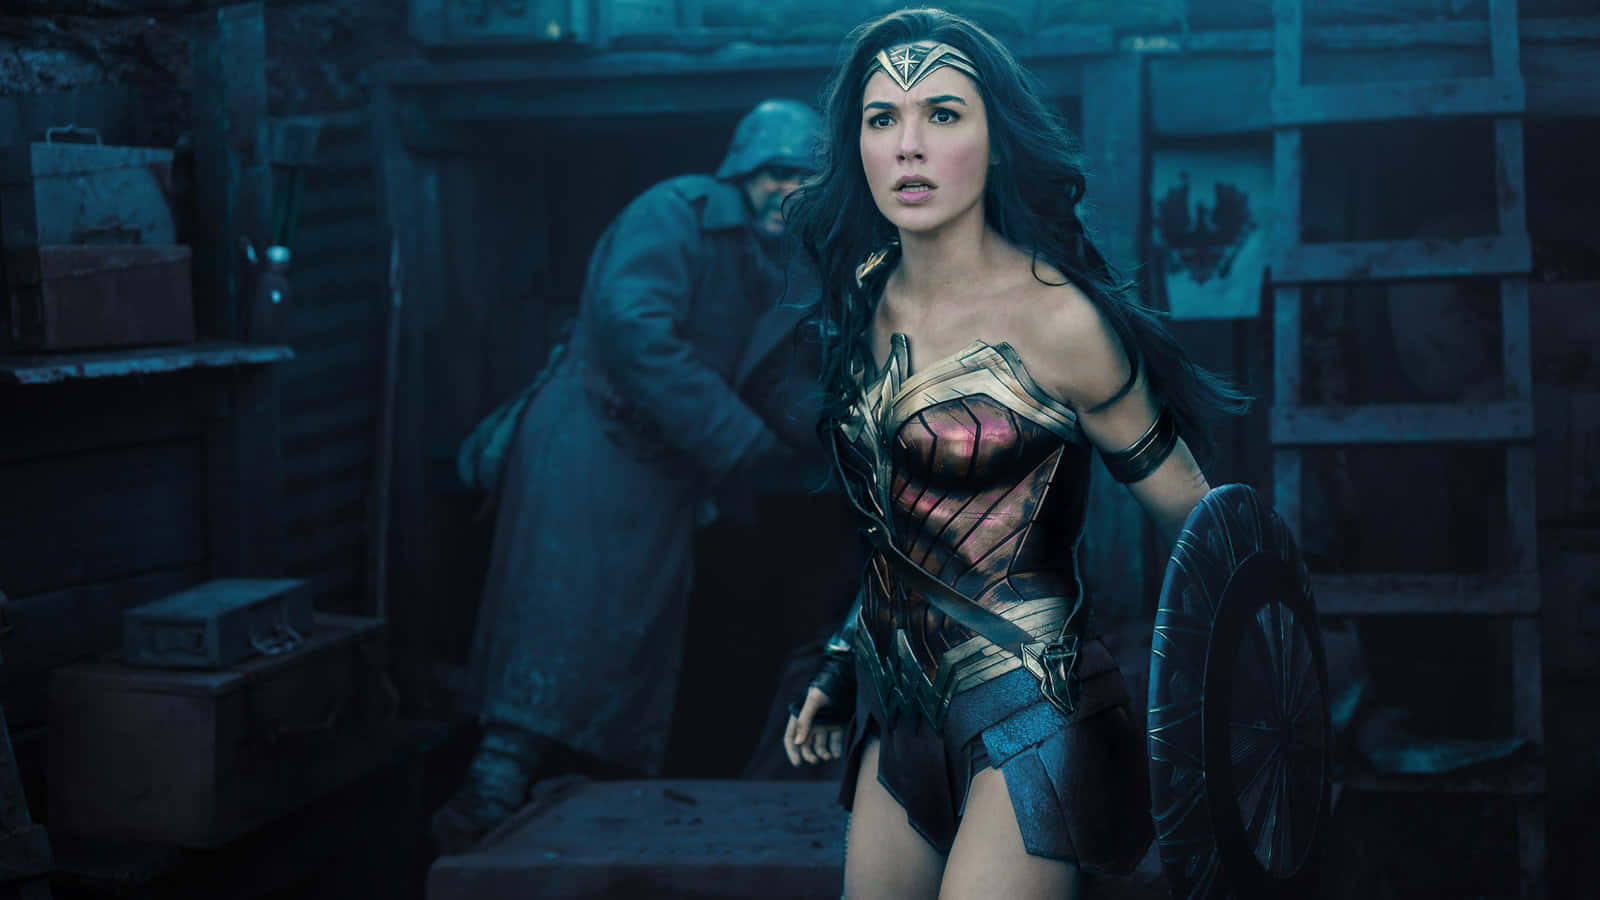 Wonder Woman's strength inspires us all